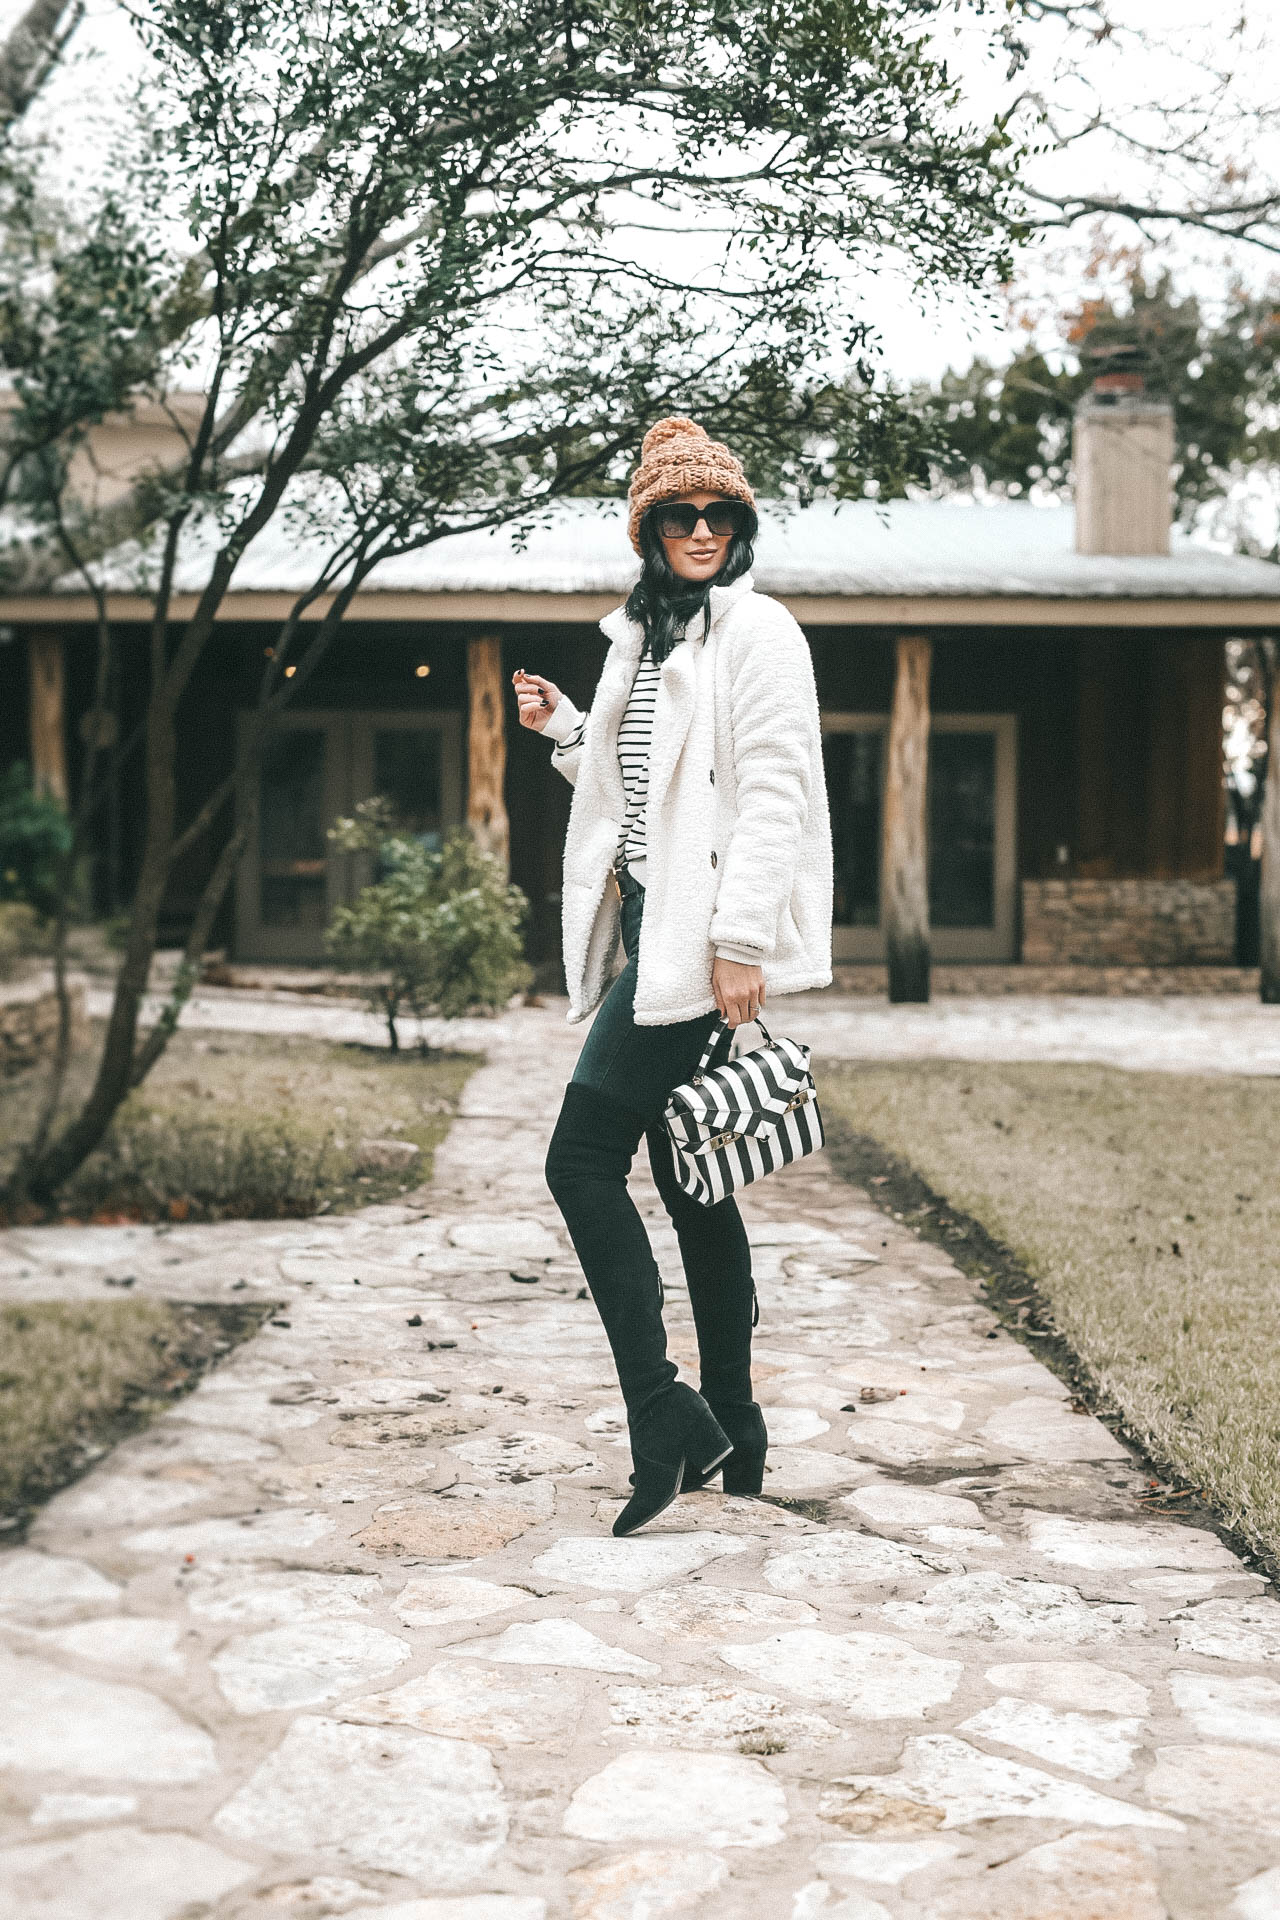 DTKAustin is sharing the most affordable beaded striped sweater from Chicwish. It is hand beaded with faux pearls and on sale for $45. Handbag is Henri Bendel, Over the Knee Boots Goodnight Macaroon, Teddy Bear coat is Goodnight Macaroon, Knit beanie is Abercrombie. || Dressed to Kill #fashion #style #womensoutfit #womensfashion #stripedsweater #knit #knitsweater #winterstyle #streetstyle #winterfashion #dtkaustin